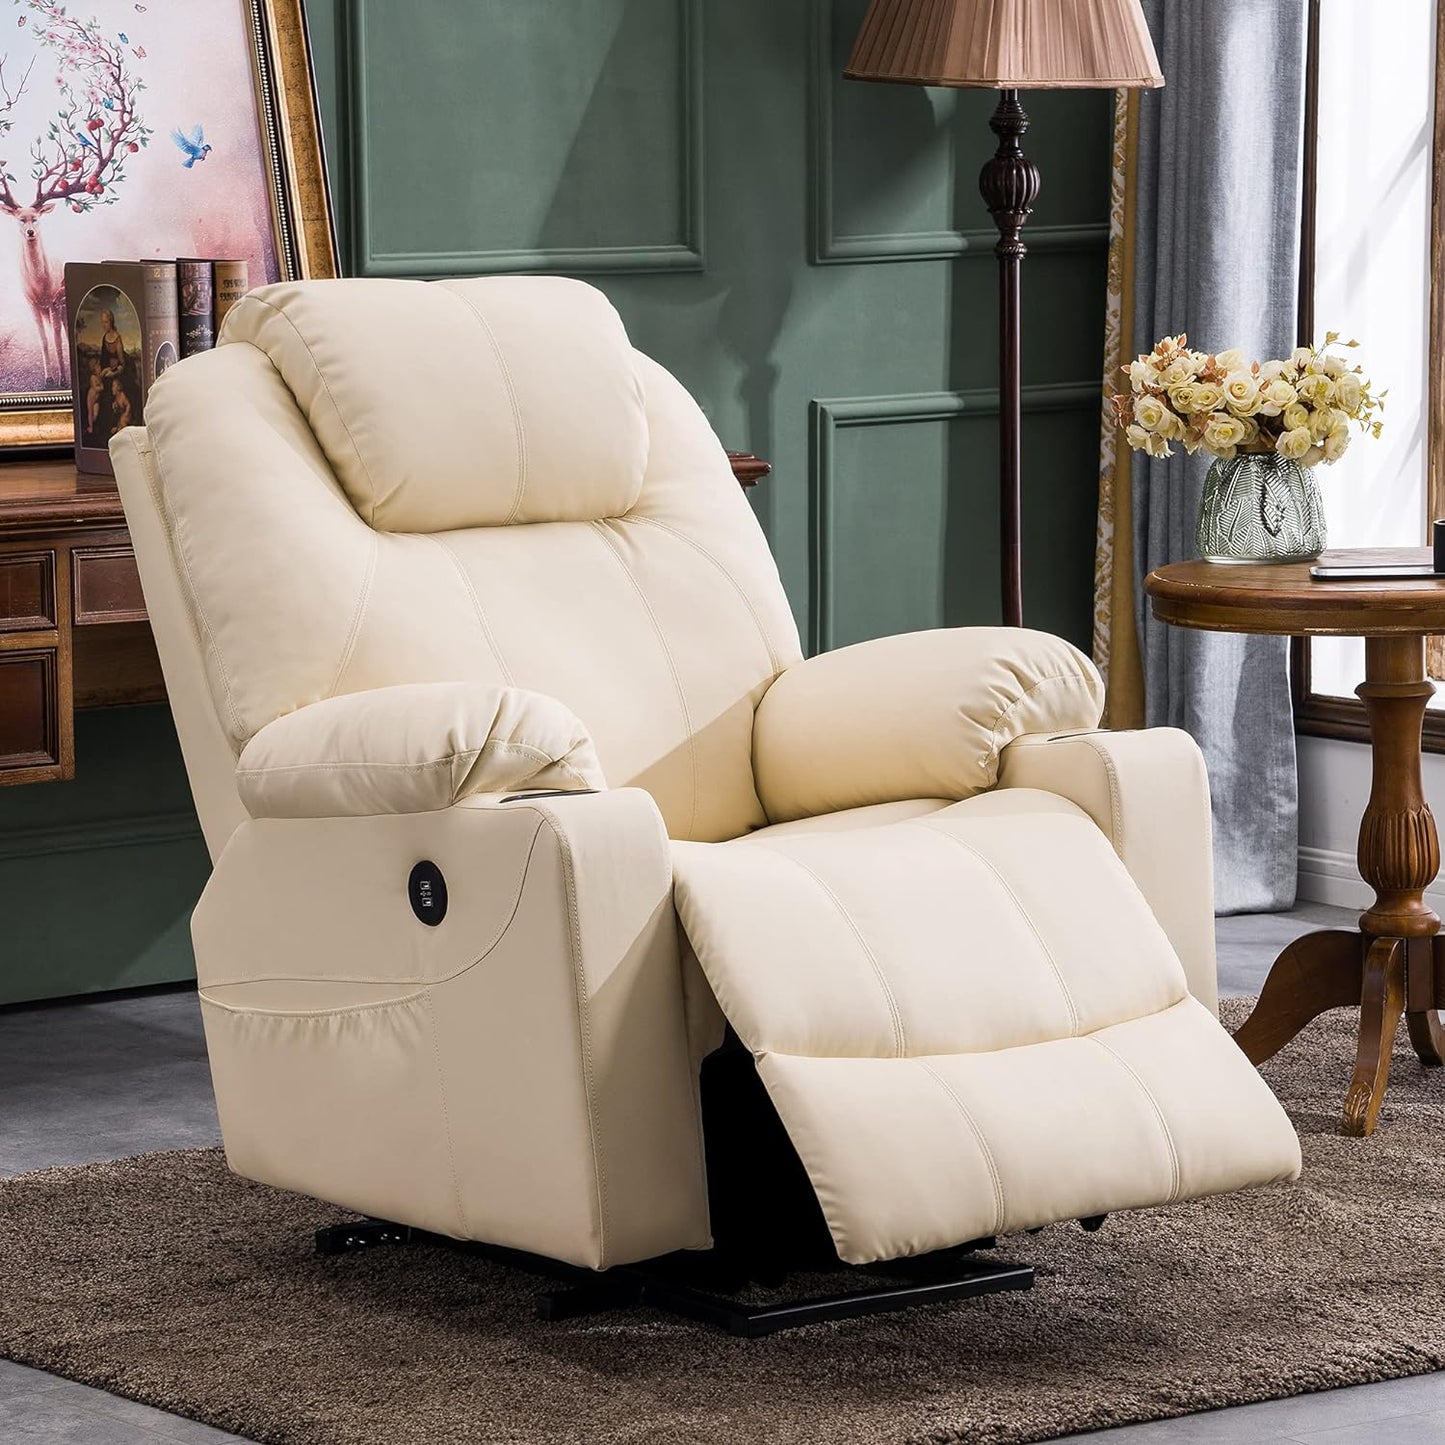 Electric Power Lift Recliner Chair Sofa with Massage and Heat for Elderly, 3 Positions, 2 Side Pockets, and Cup Holders, USB Ports, Faux Leather 7040 (Medium, Cream White)